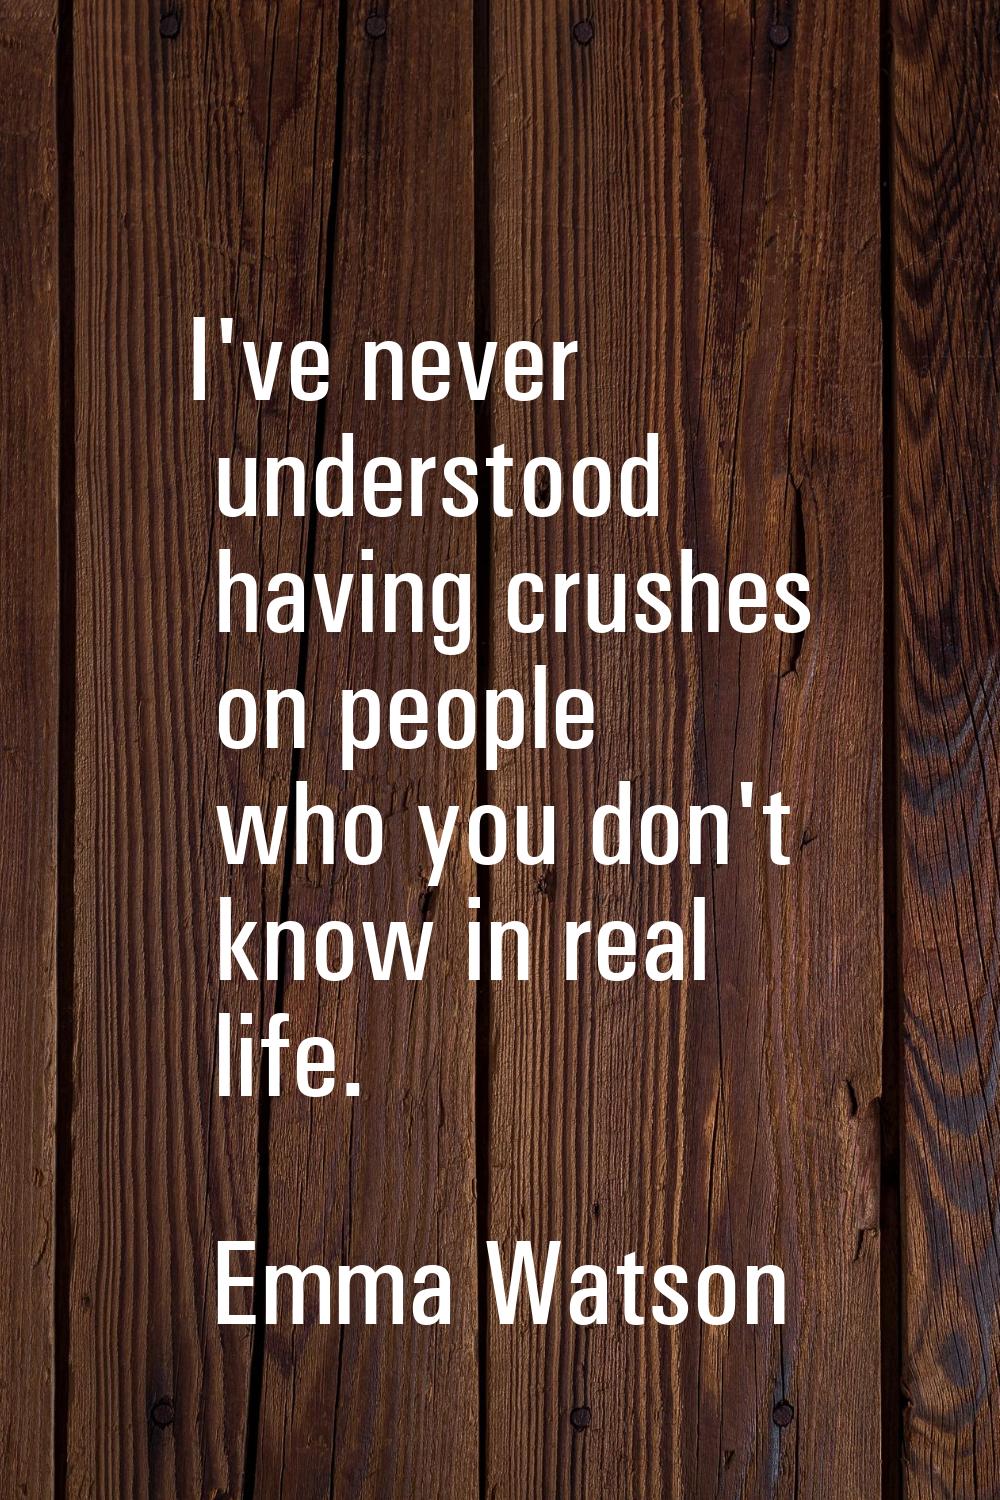 I've never understood having crushes on people who you don't know in real life.